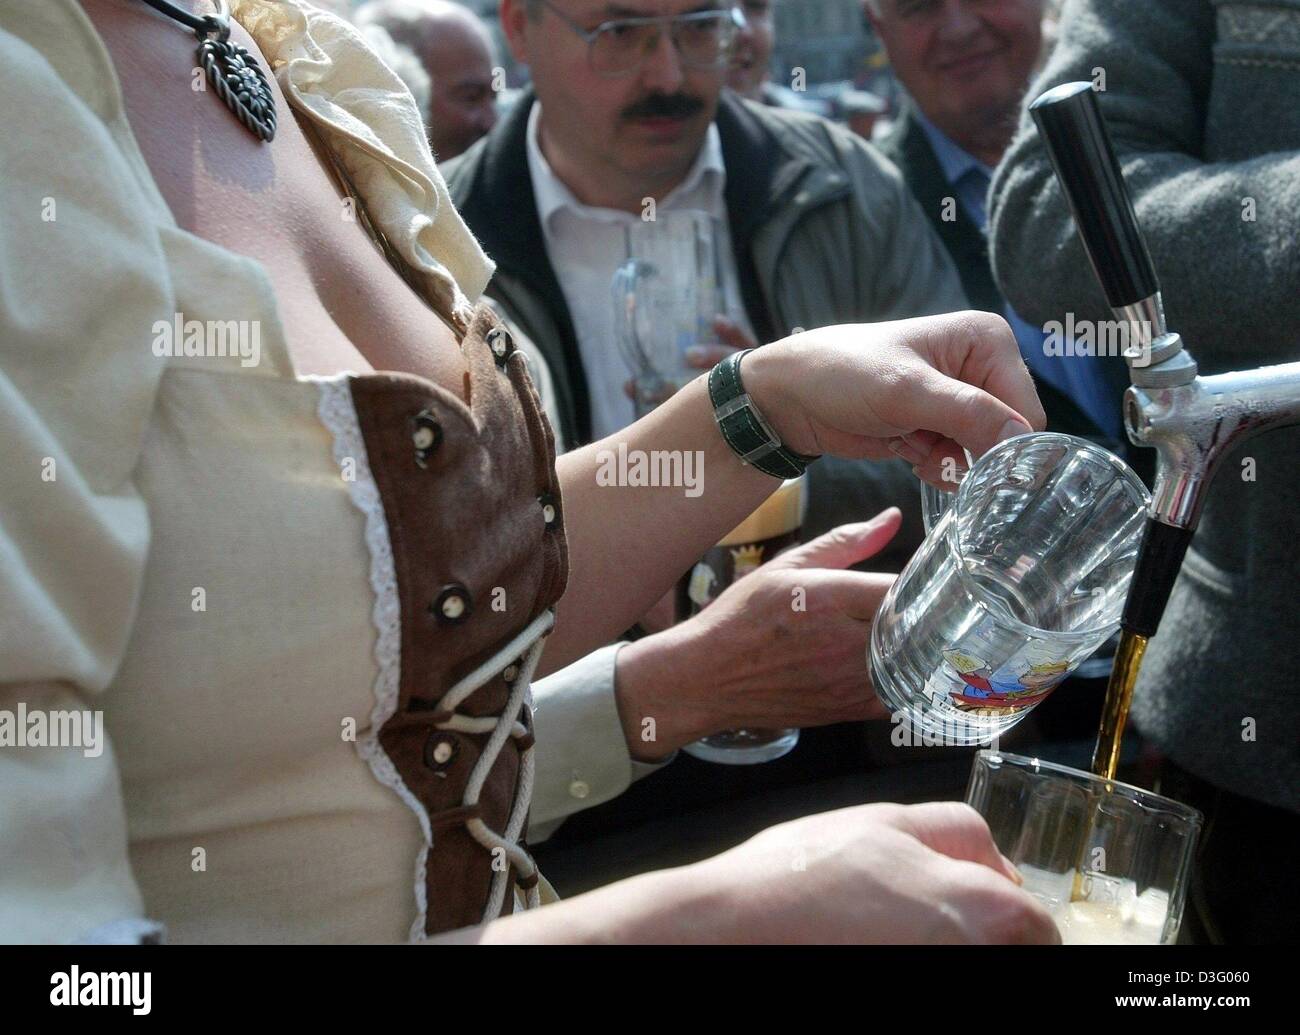 (dpa) - Beer is filled into beer glasses at the beer fountain in Munich, Germany, 23 April 2003. 23 April, the day of the beer, marks the beginning of the Bavarian beer week. Until 30 April, exhibitions, seminars and games about and with beer are offered by breweries, restaurants and tourism associations. Stock Photo